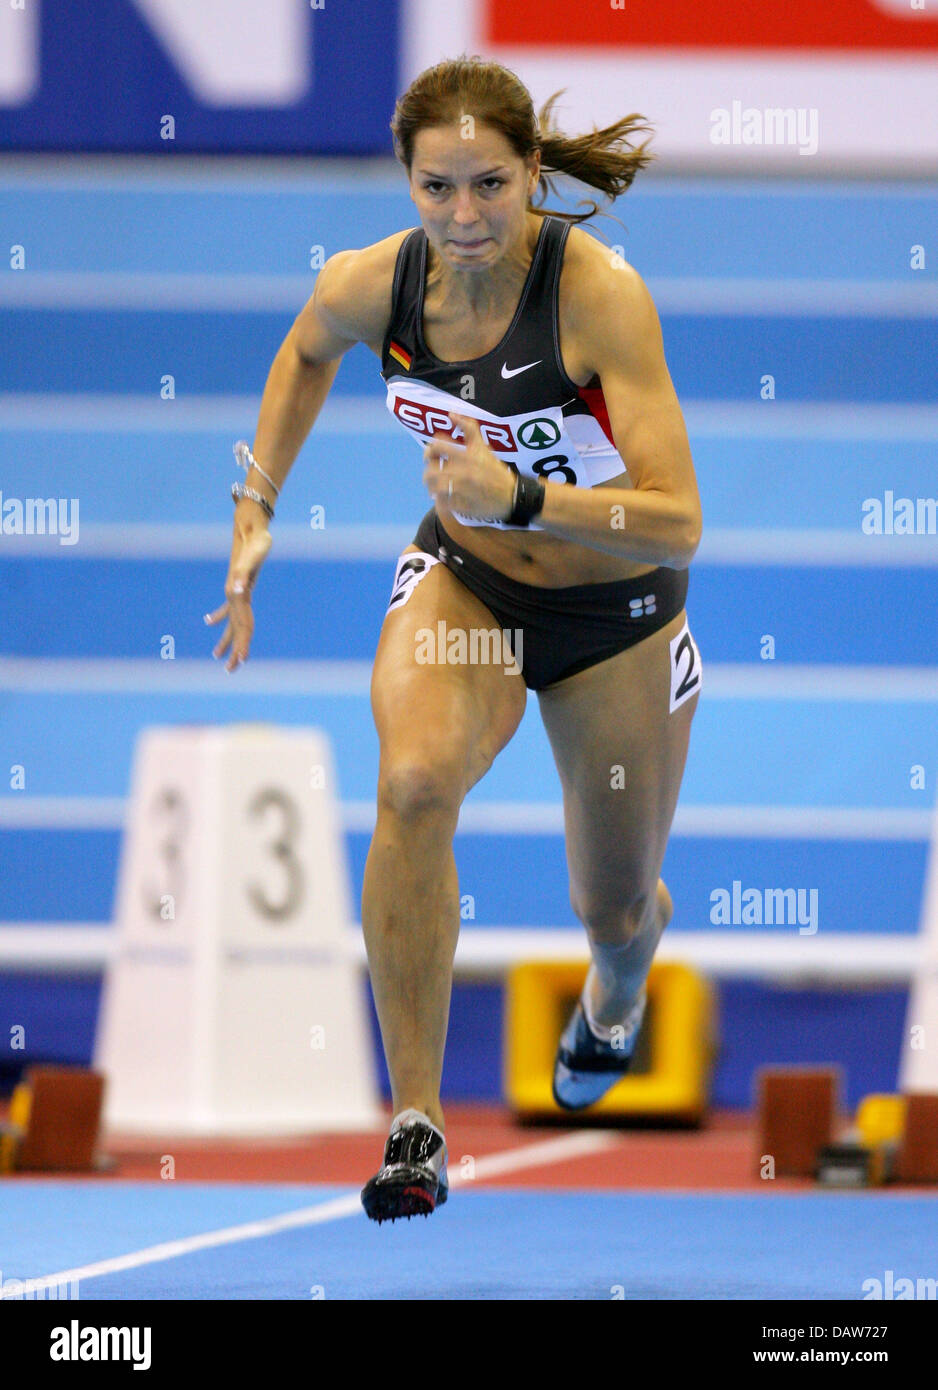 German athlete Sina Schielke starts at the Ladies' 60m Prelims of the European Athletics Indoor Championships in Birmingham, United Kingdom, Friday, 02 March 2007. Schielke failed to move up to the next round with a time of 7.38 seconds. Photo: Arne Dedert Stock Photo